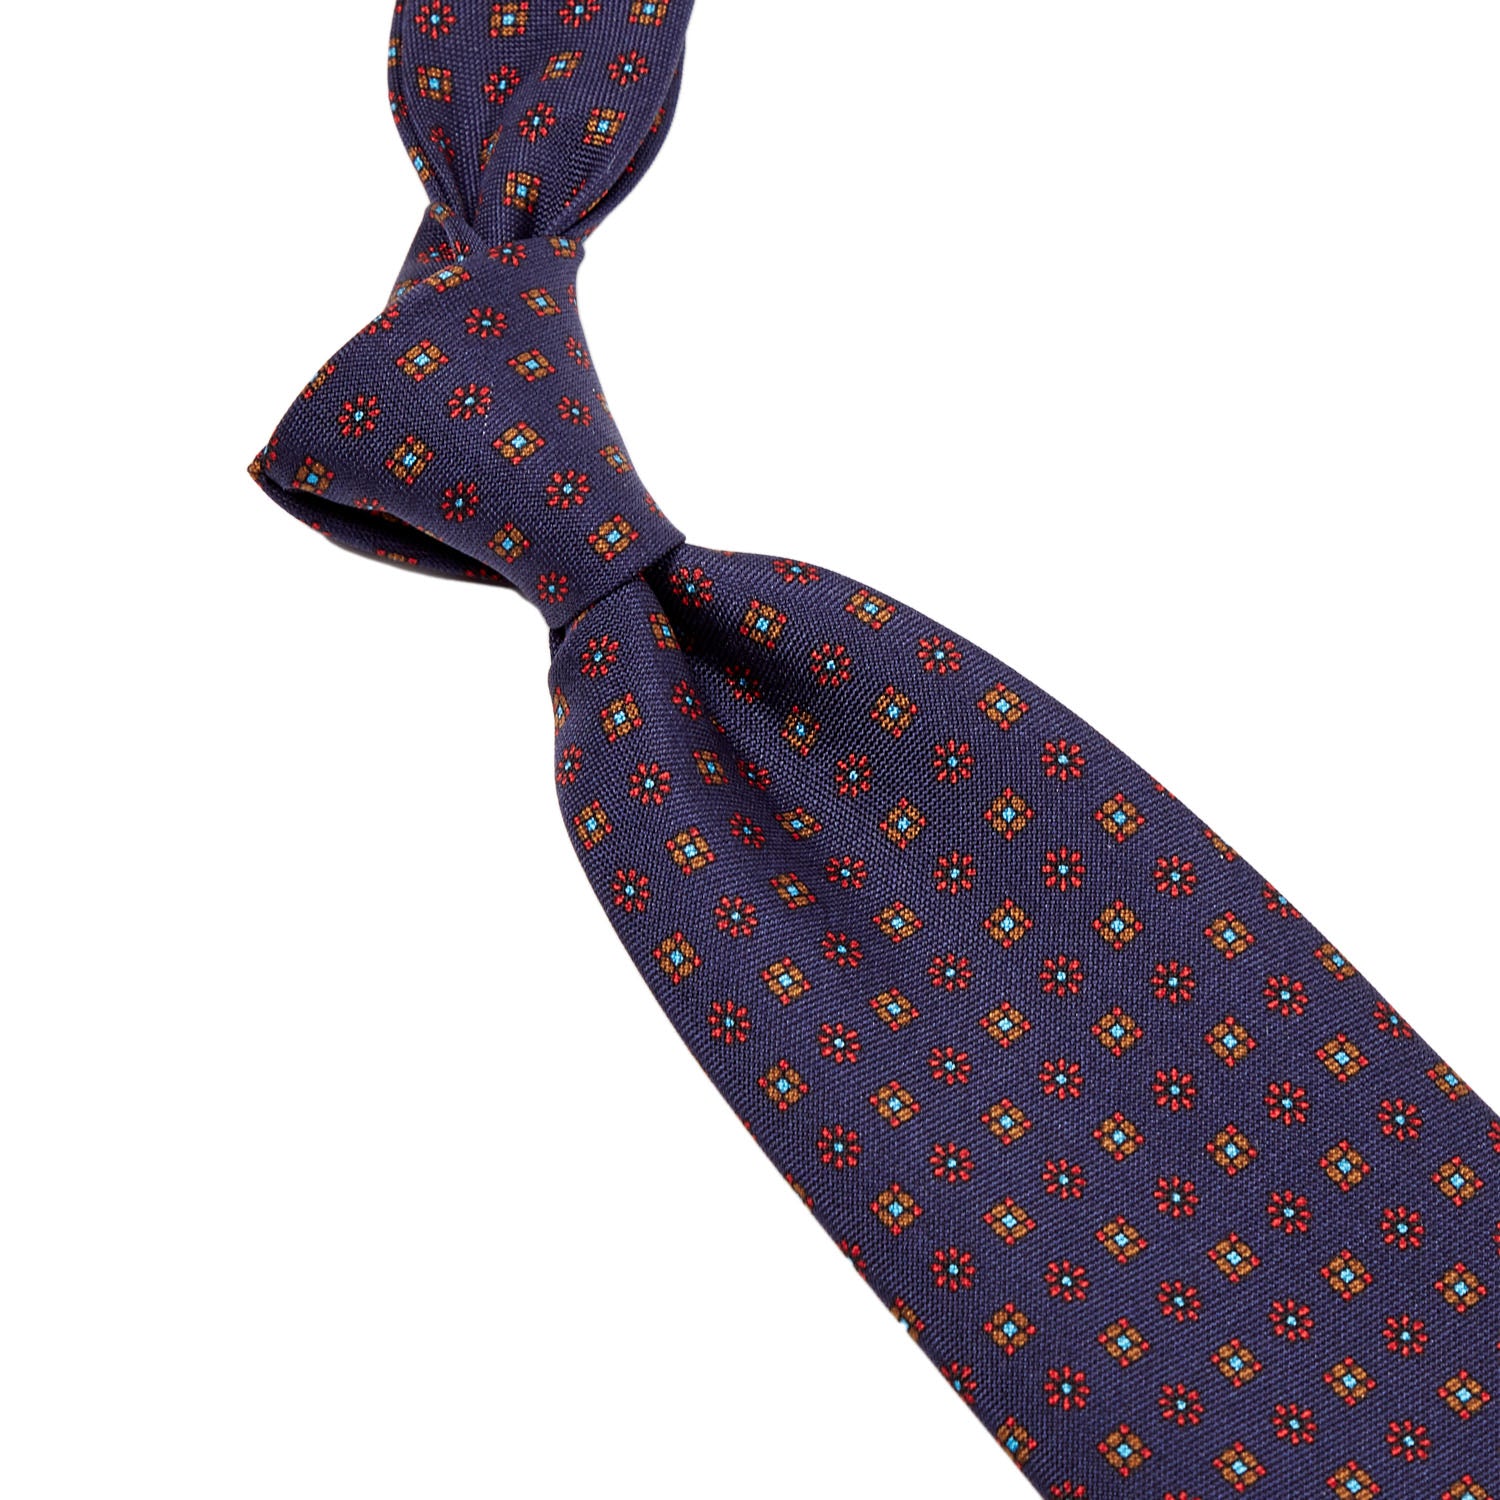 A Sovereign Grade Navy Floral 25oz Silk Hopsack Tie (150x8.5 cm), handmade in the United Kingdom with quality craftsmanship and brand name KirbyAllison.com.